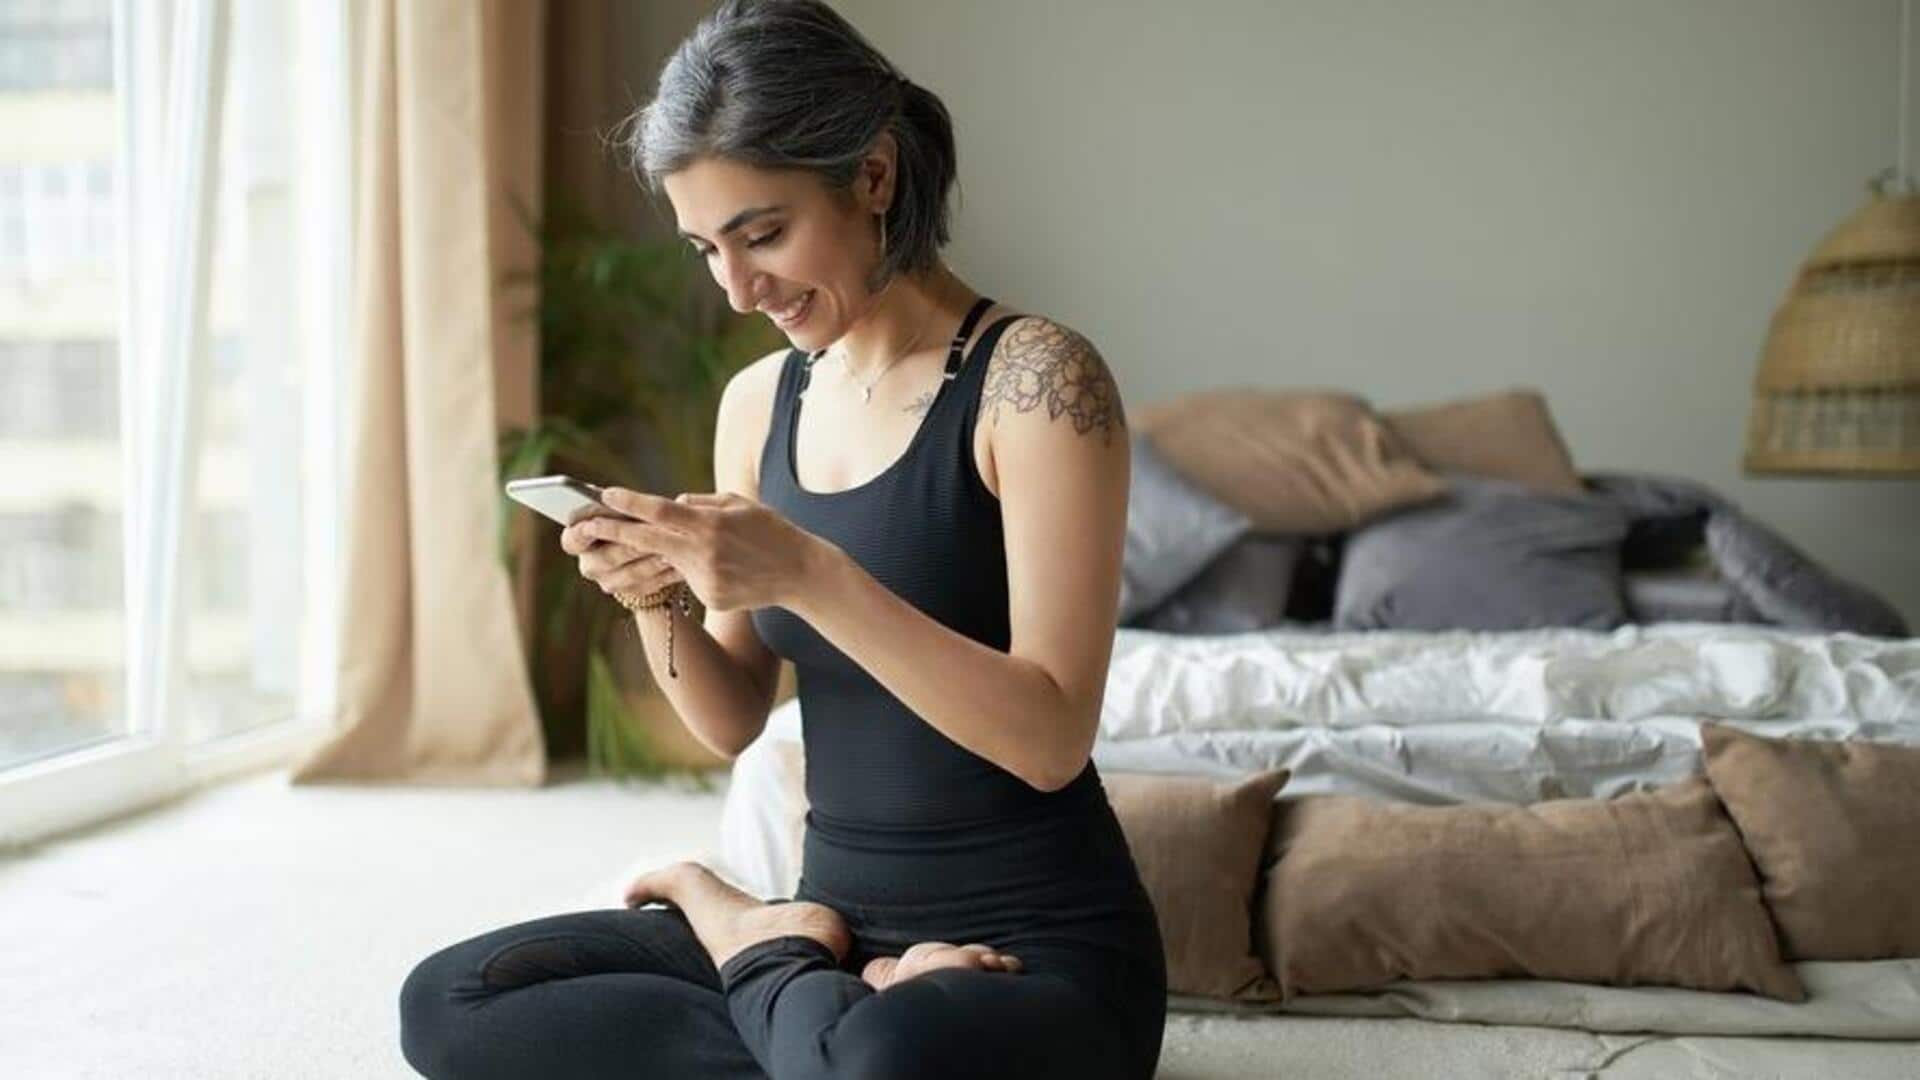 Headspace meditation app: Tips to use it the right way